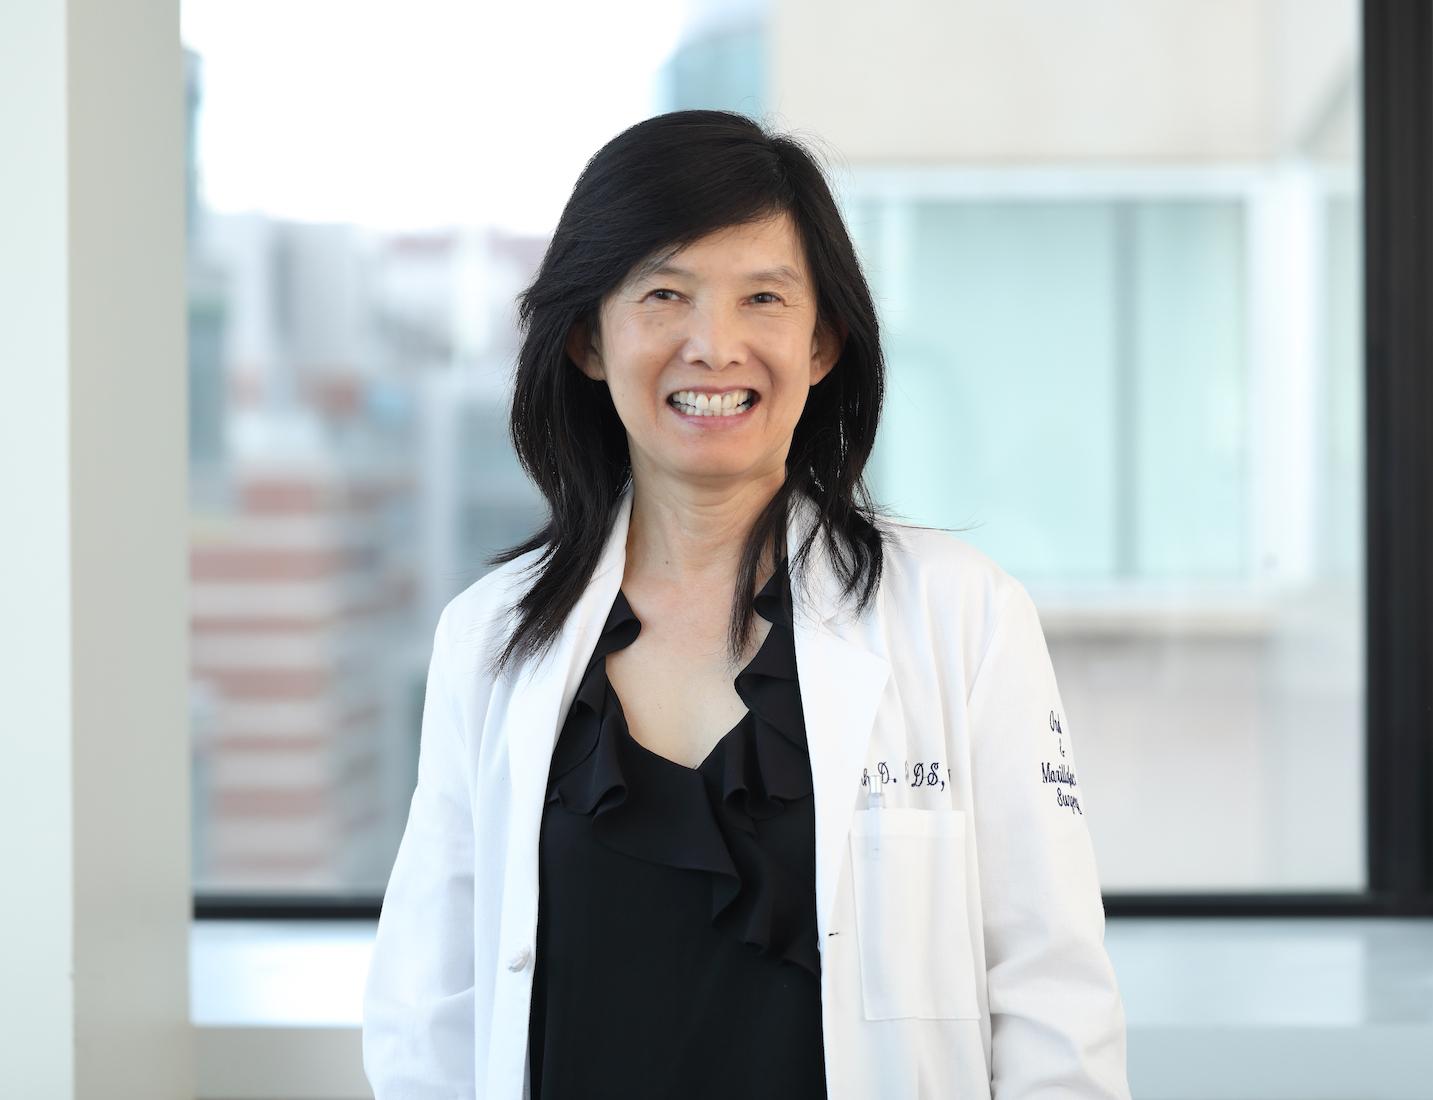 Dr. Anh Le